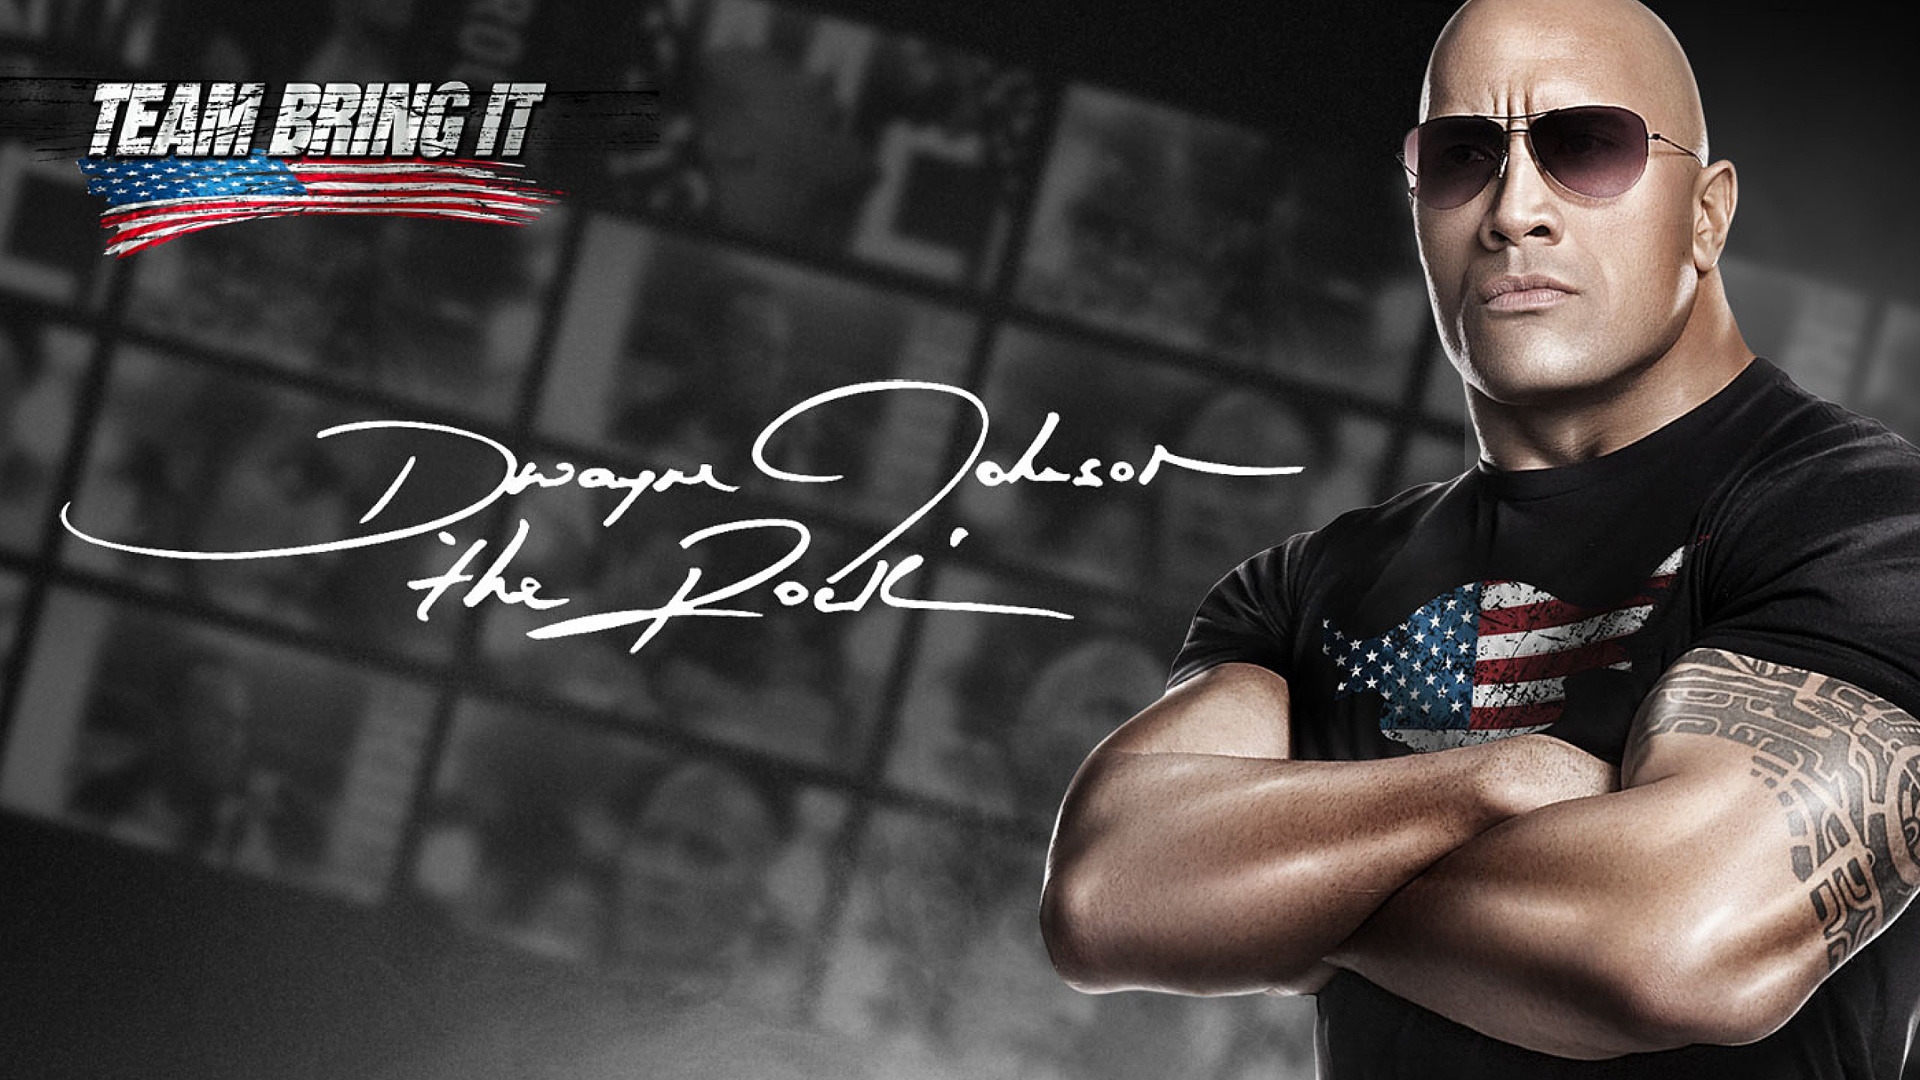 The Rock WWE for 1920 x 1080 HDTV 1080p resolution